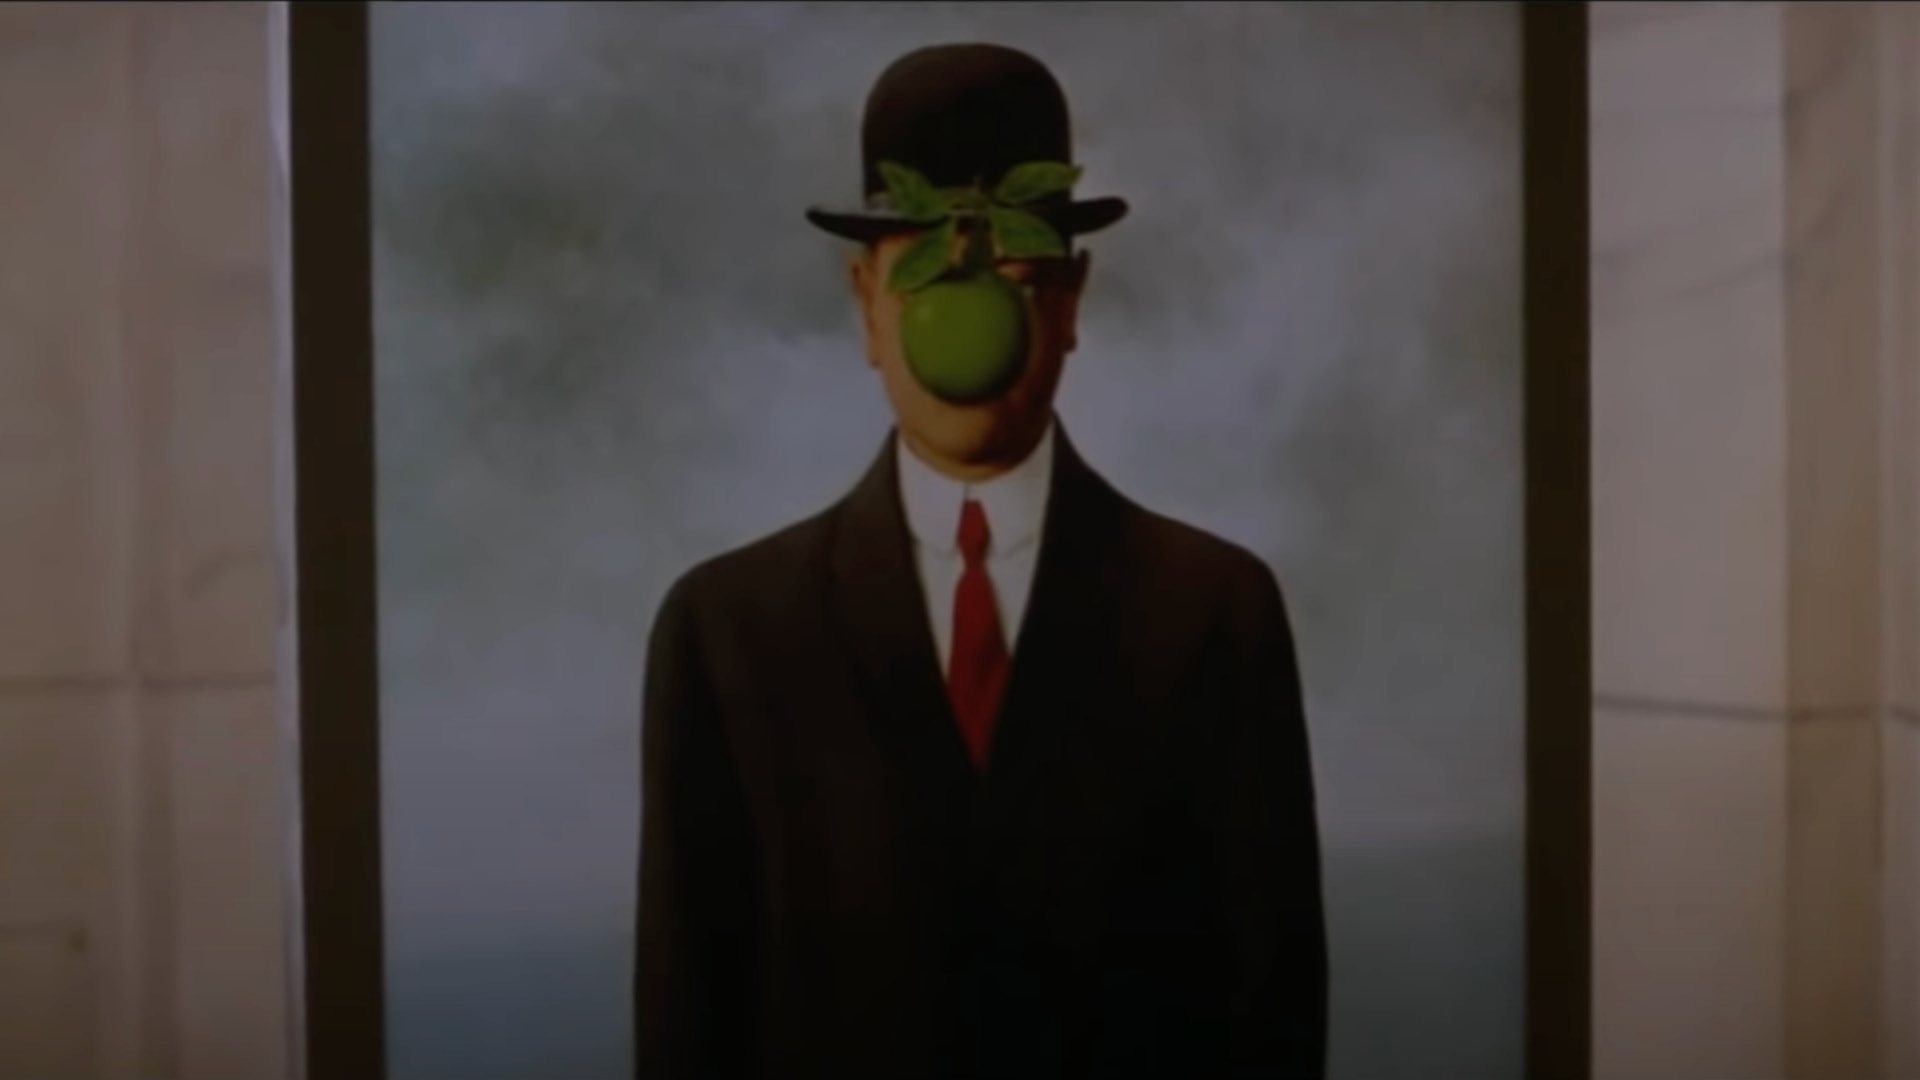 THE THOMAS CROWN AFFAIR film still of man in a suit, red tie, and black hat with a green apple in front of their face.